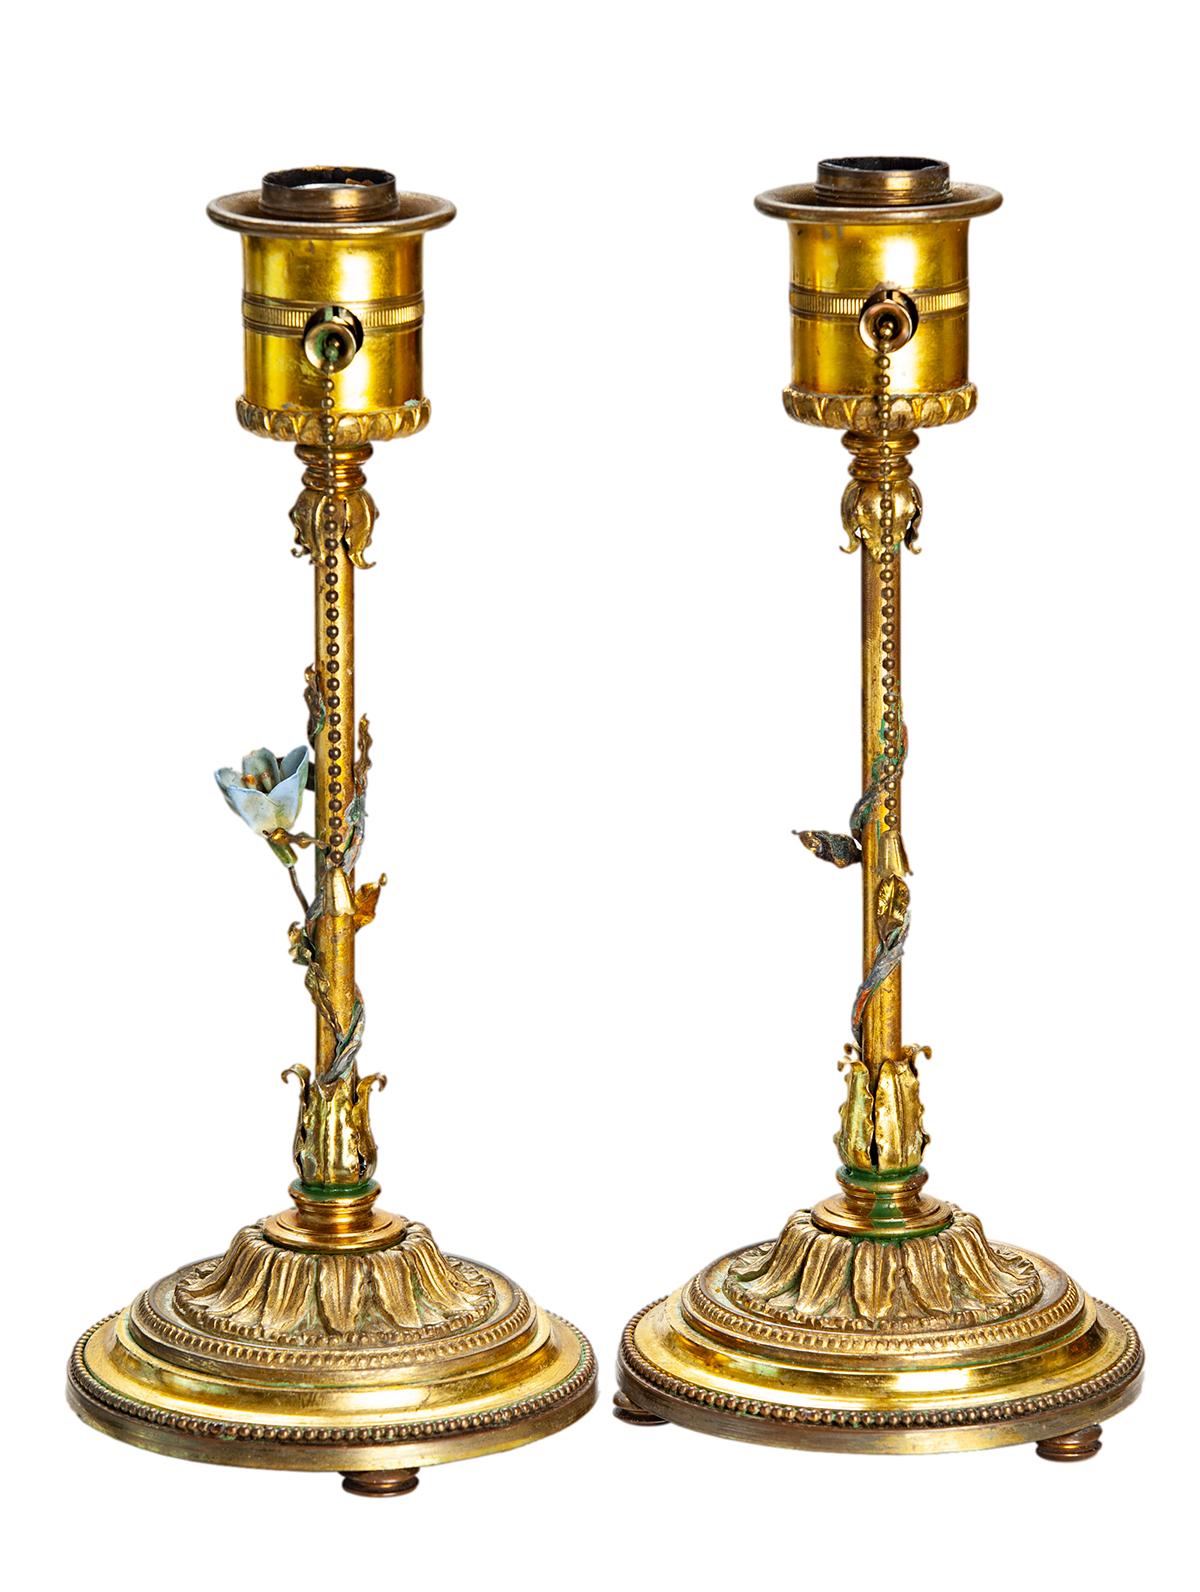 Hand-Crafted German Brass Candlestick Lamps w Vines & Vintage Stenciled Shade, a Pair For Sale